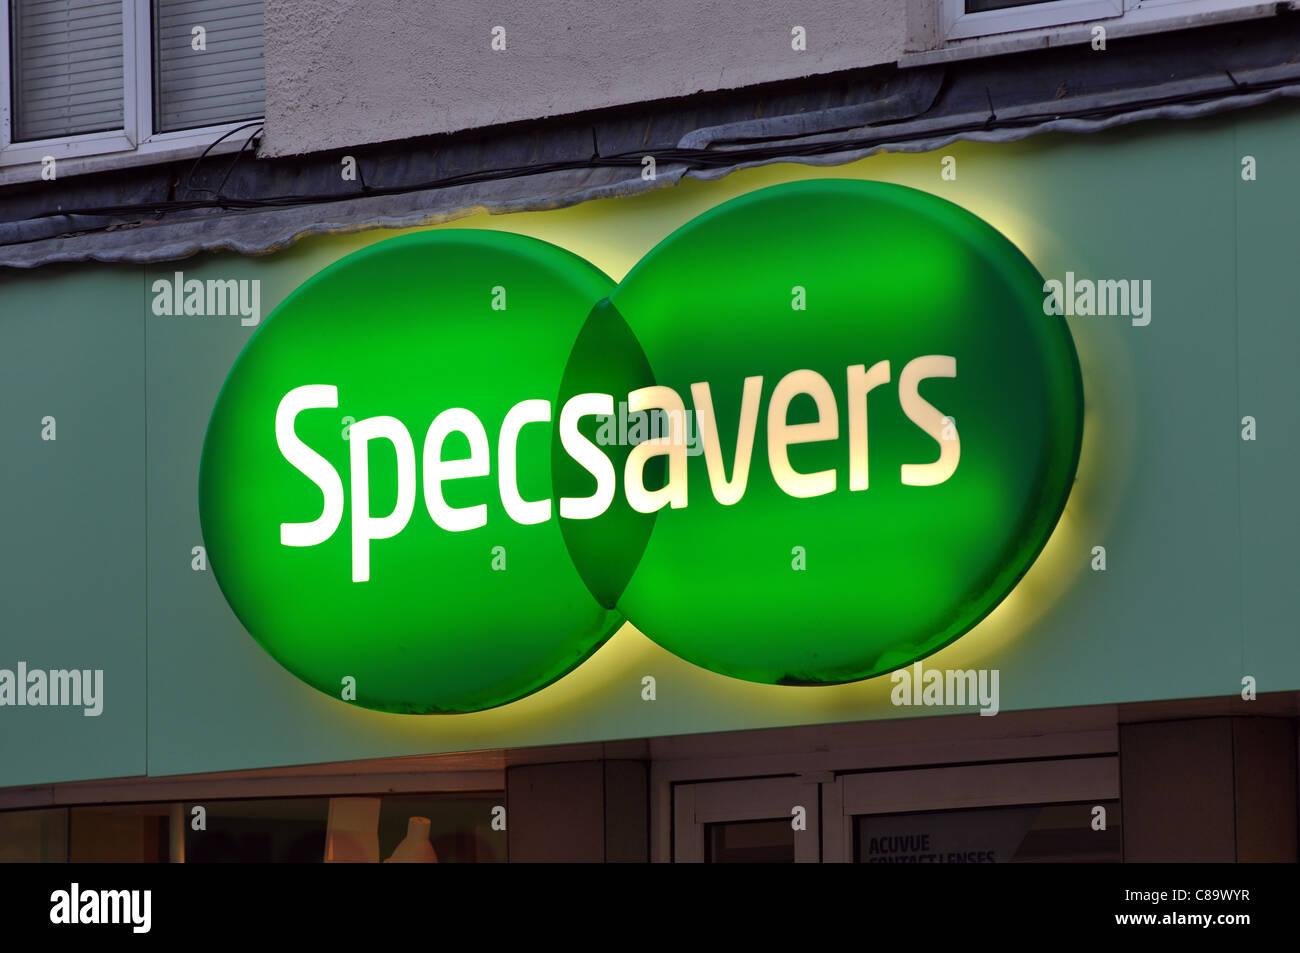 Specsavers shop sign Stock Photo